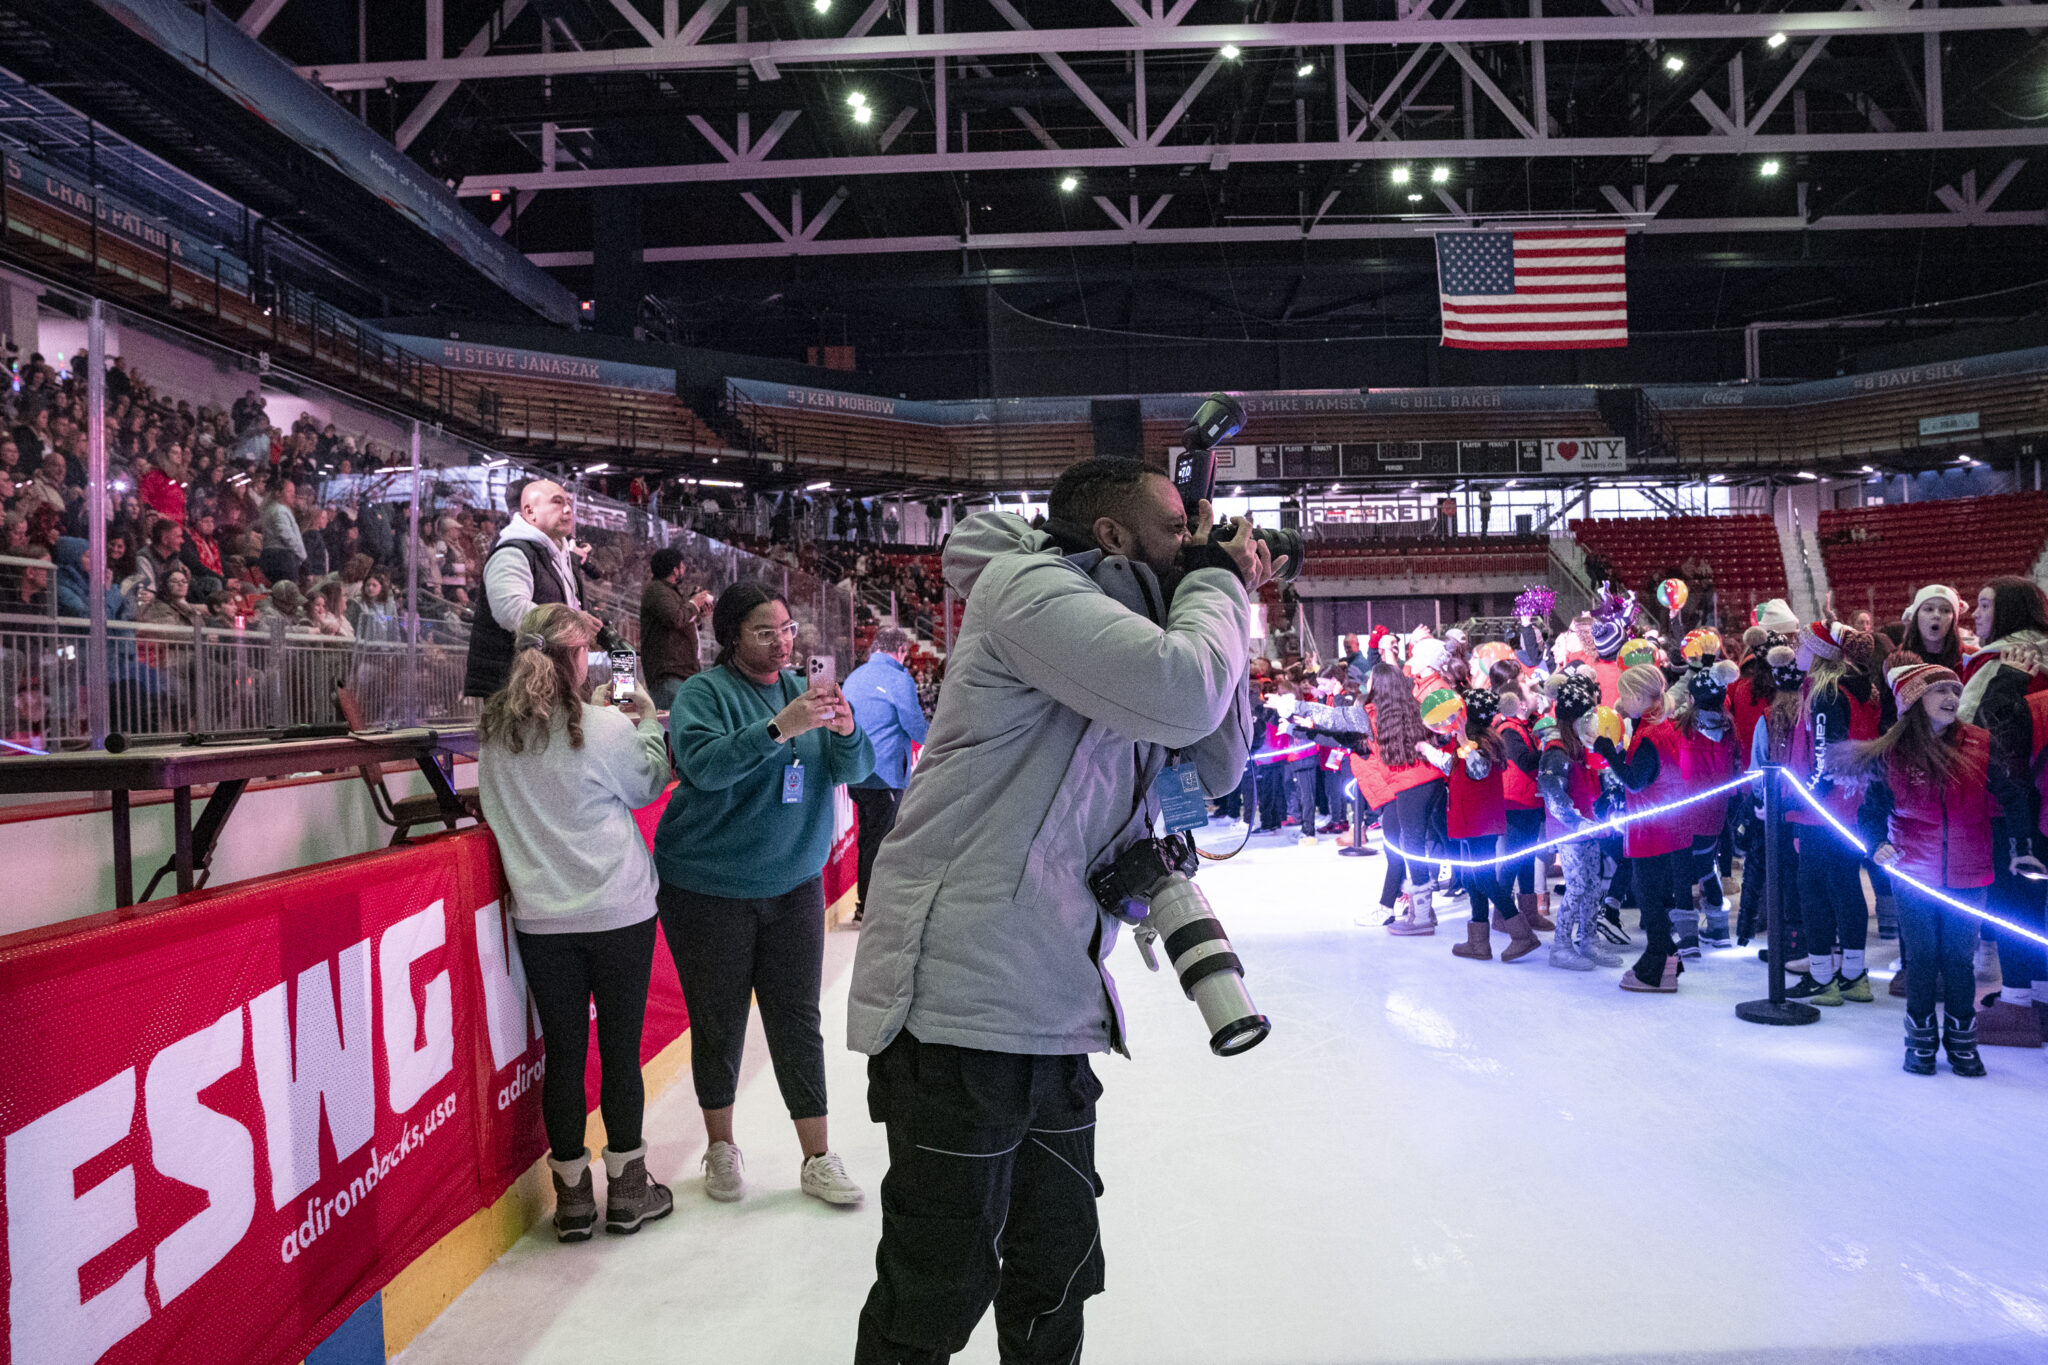 a photographer takes pictures of the opening ceremony of the empire state winter games in a hockey area full of people